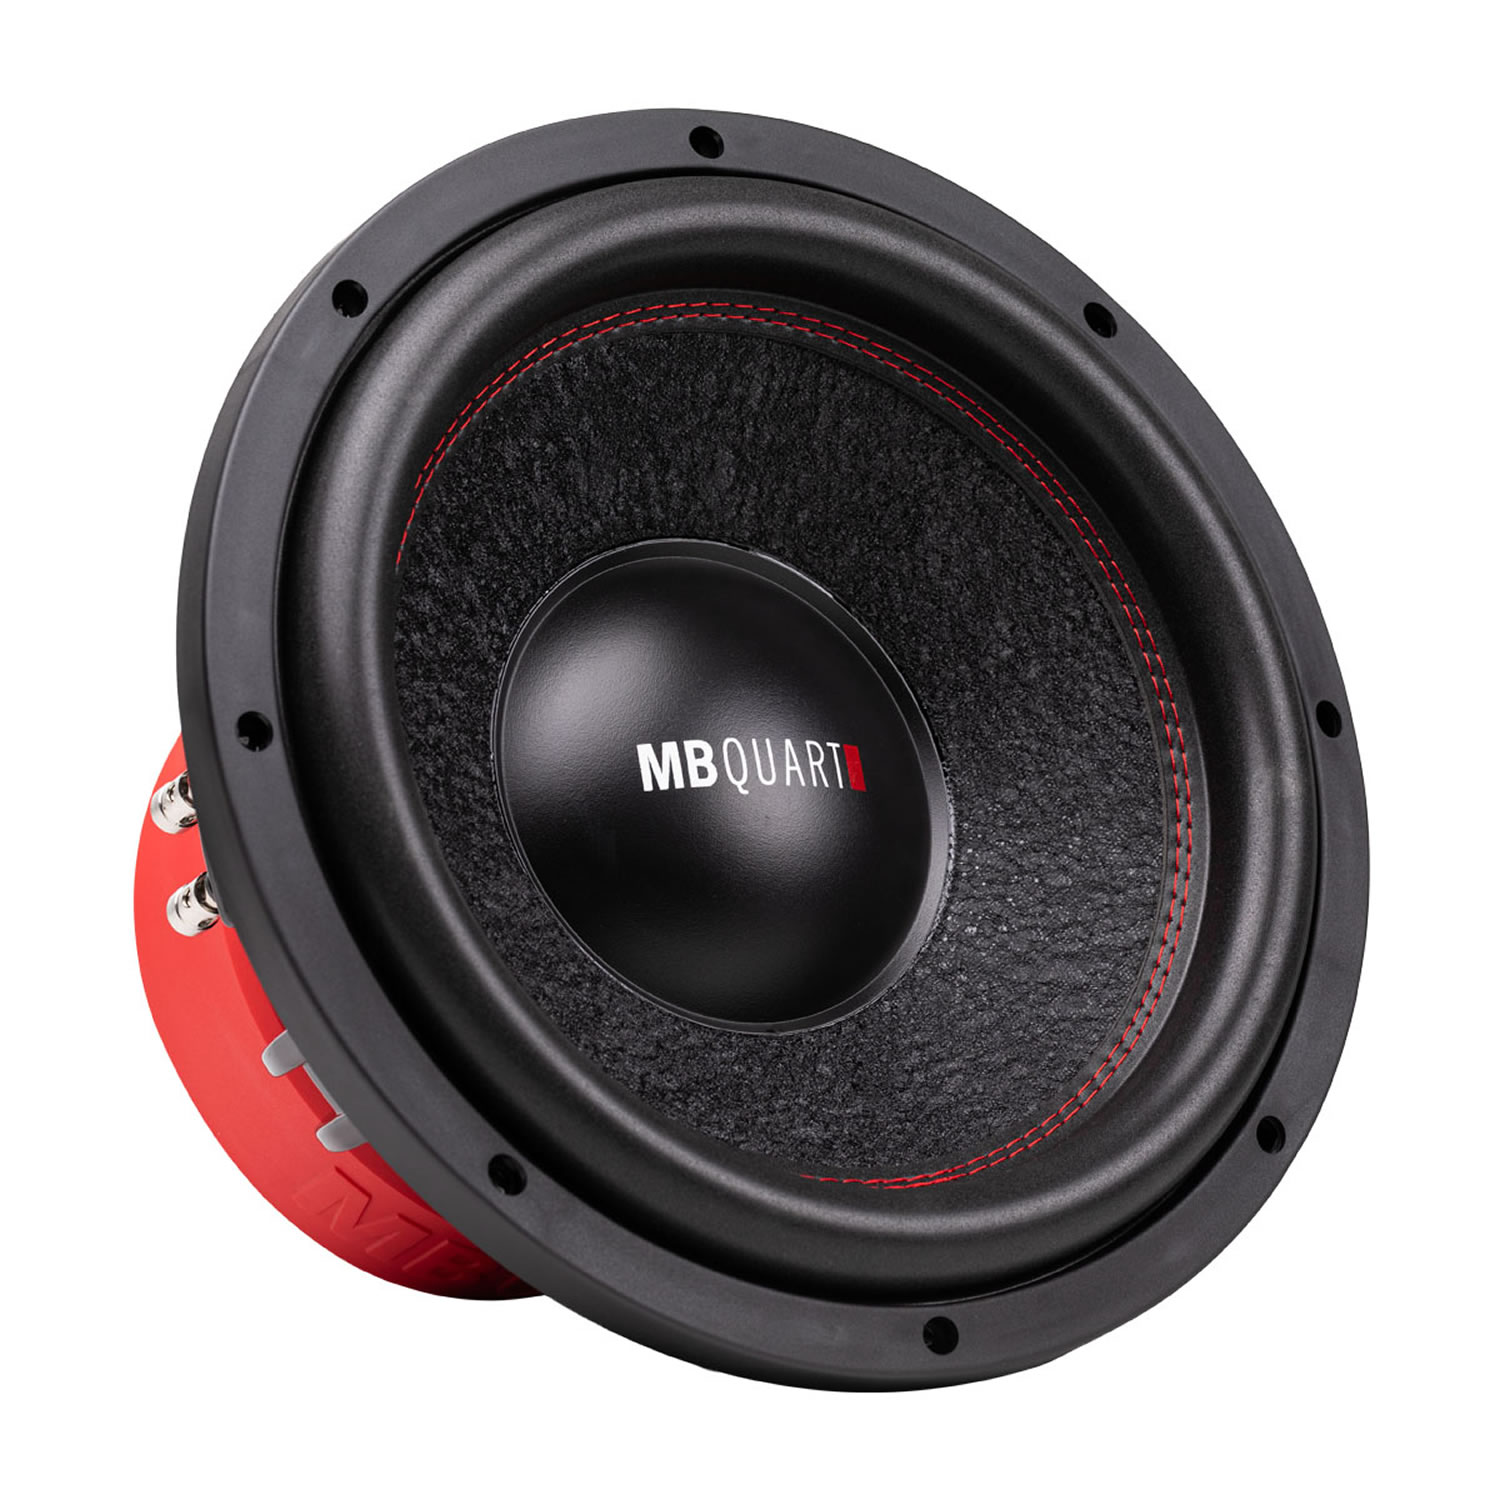 RW1-304 Reference 12 Inch 4 Ohm Subwoofer | MB